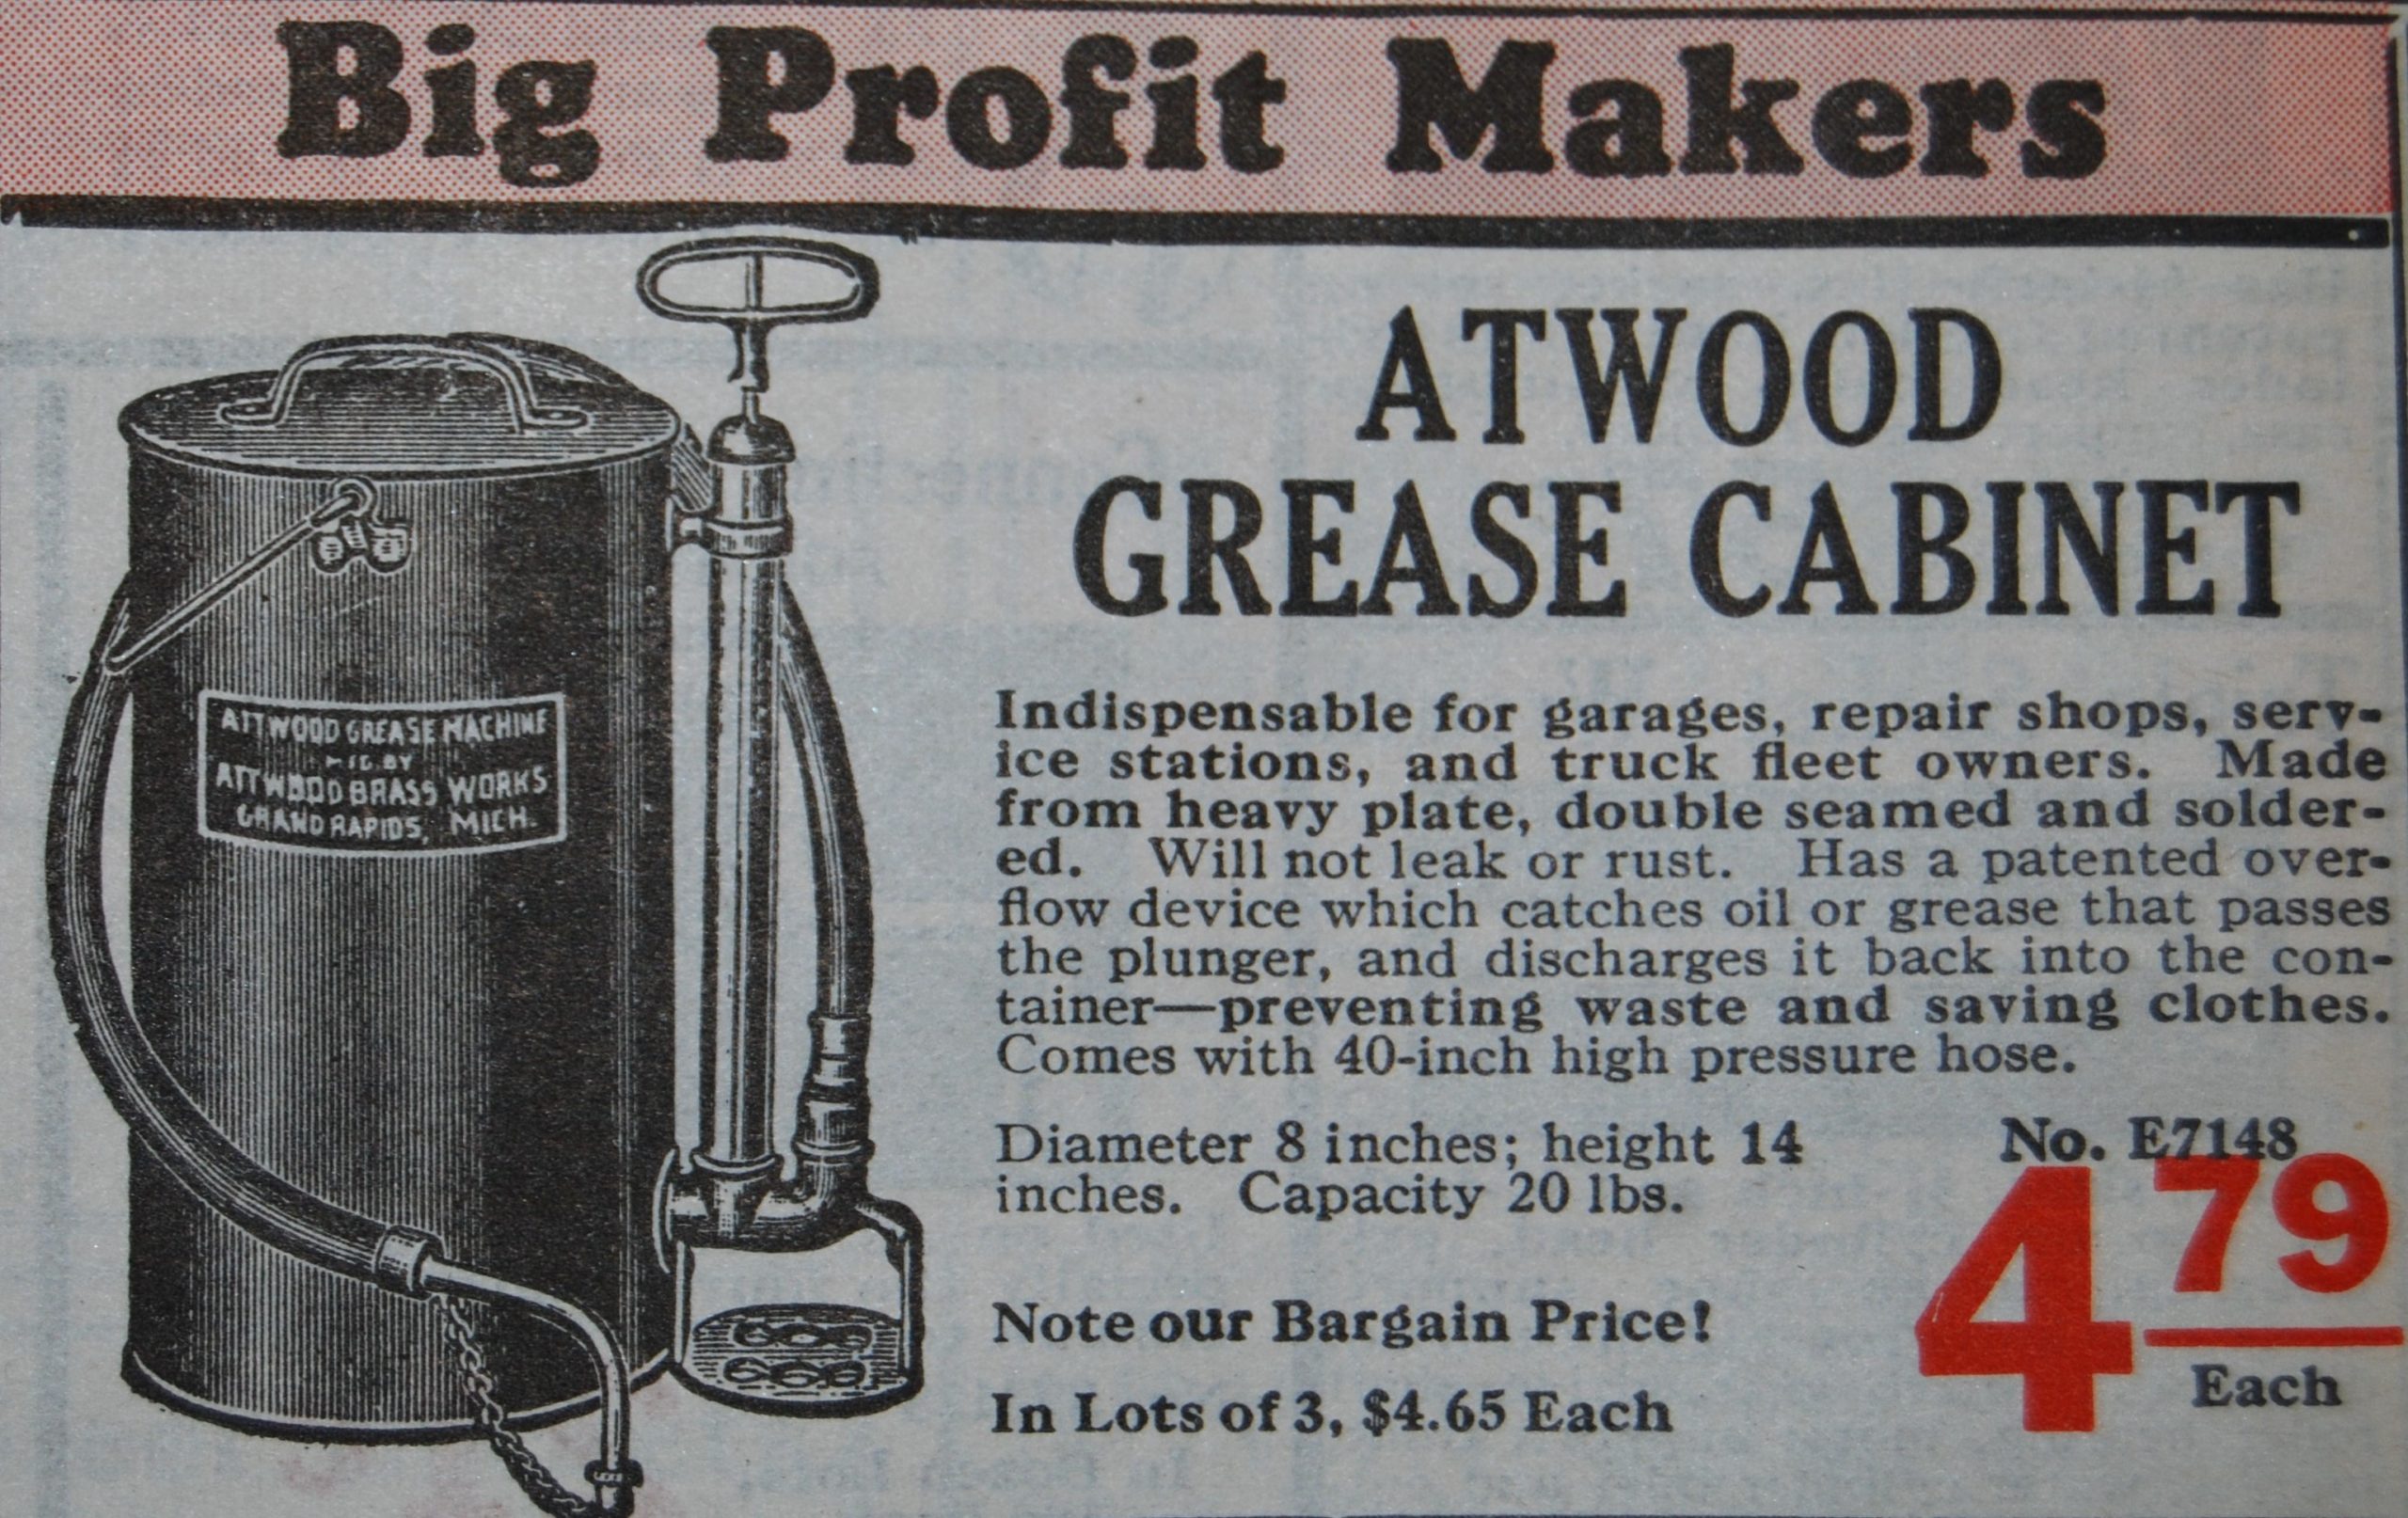 Vintage Shop Equipment: Attwood Grease Cabinet | THE SHOP